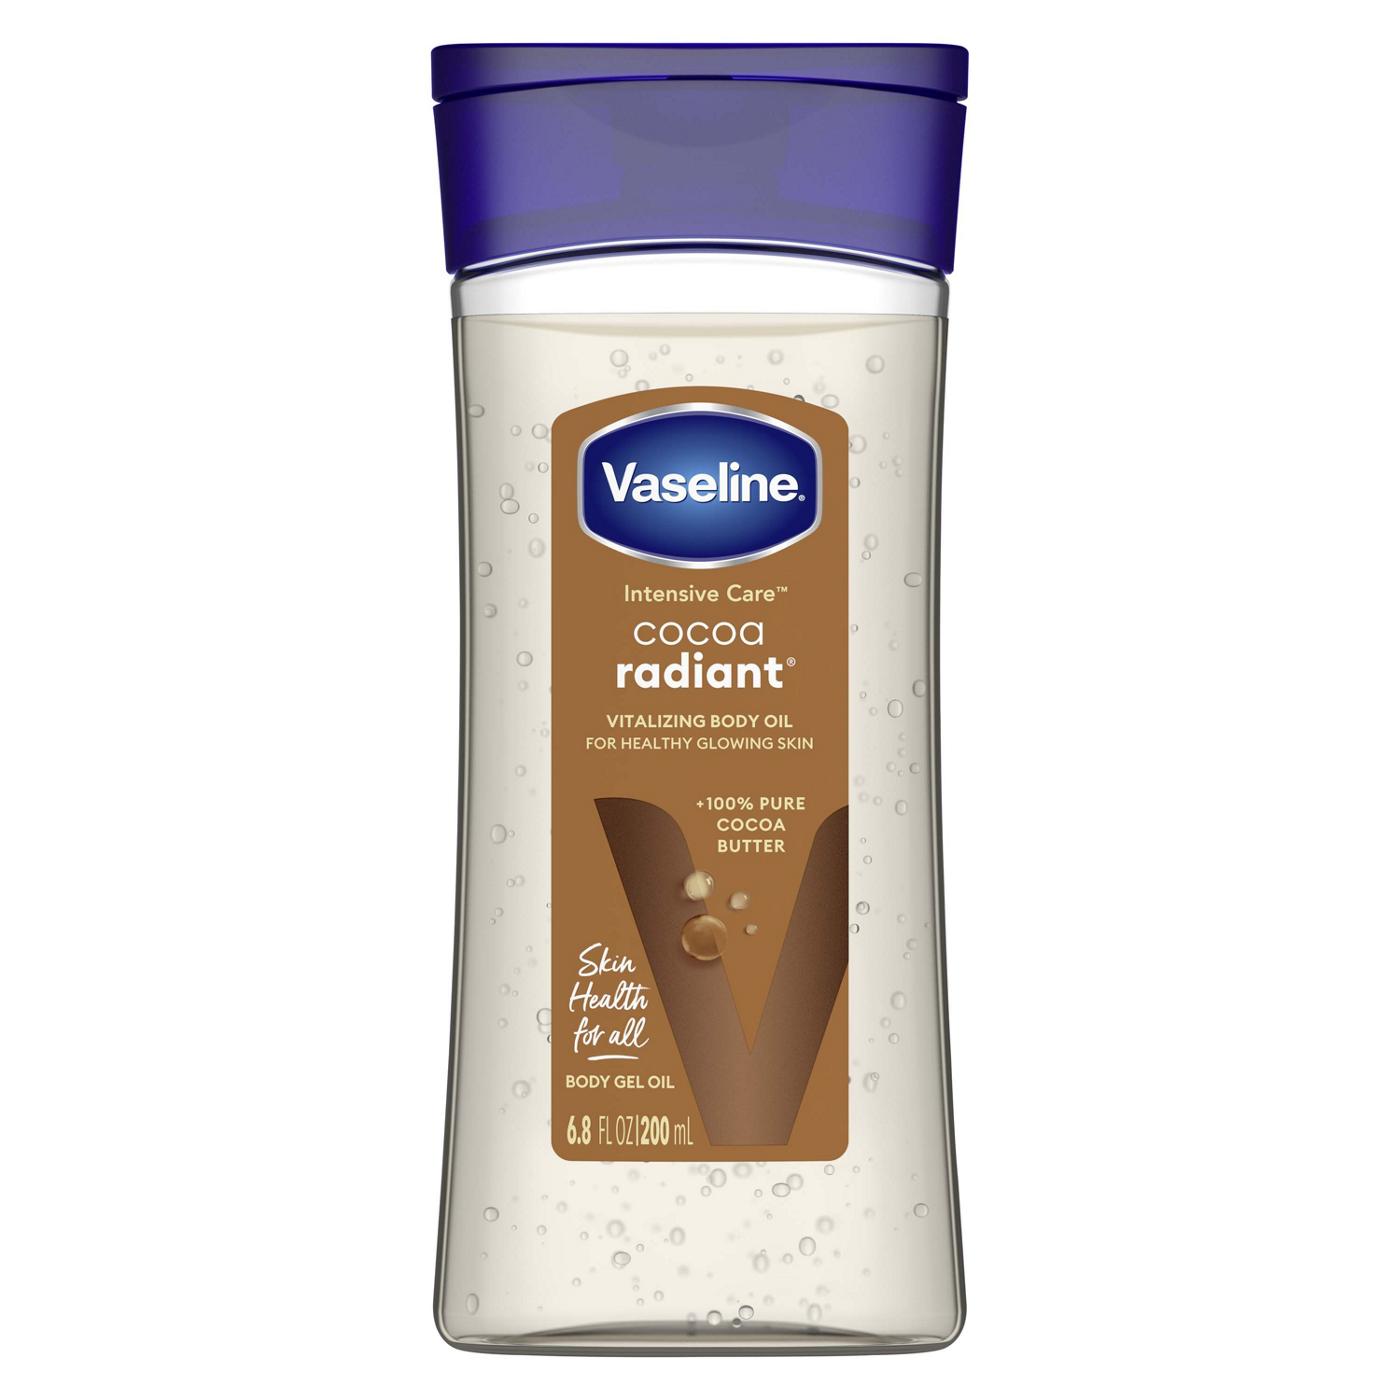 Vaseline Intensive Care for Glowing Skin Cocoa Radiant; image 1 of 8